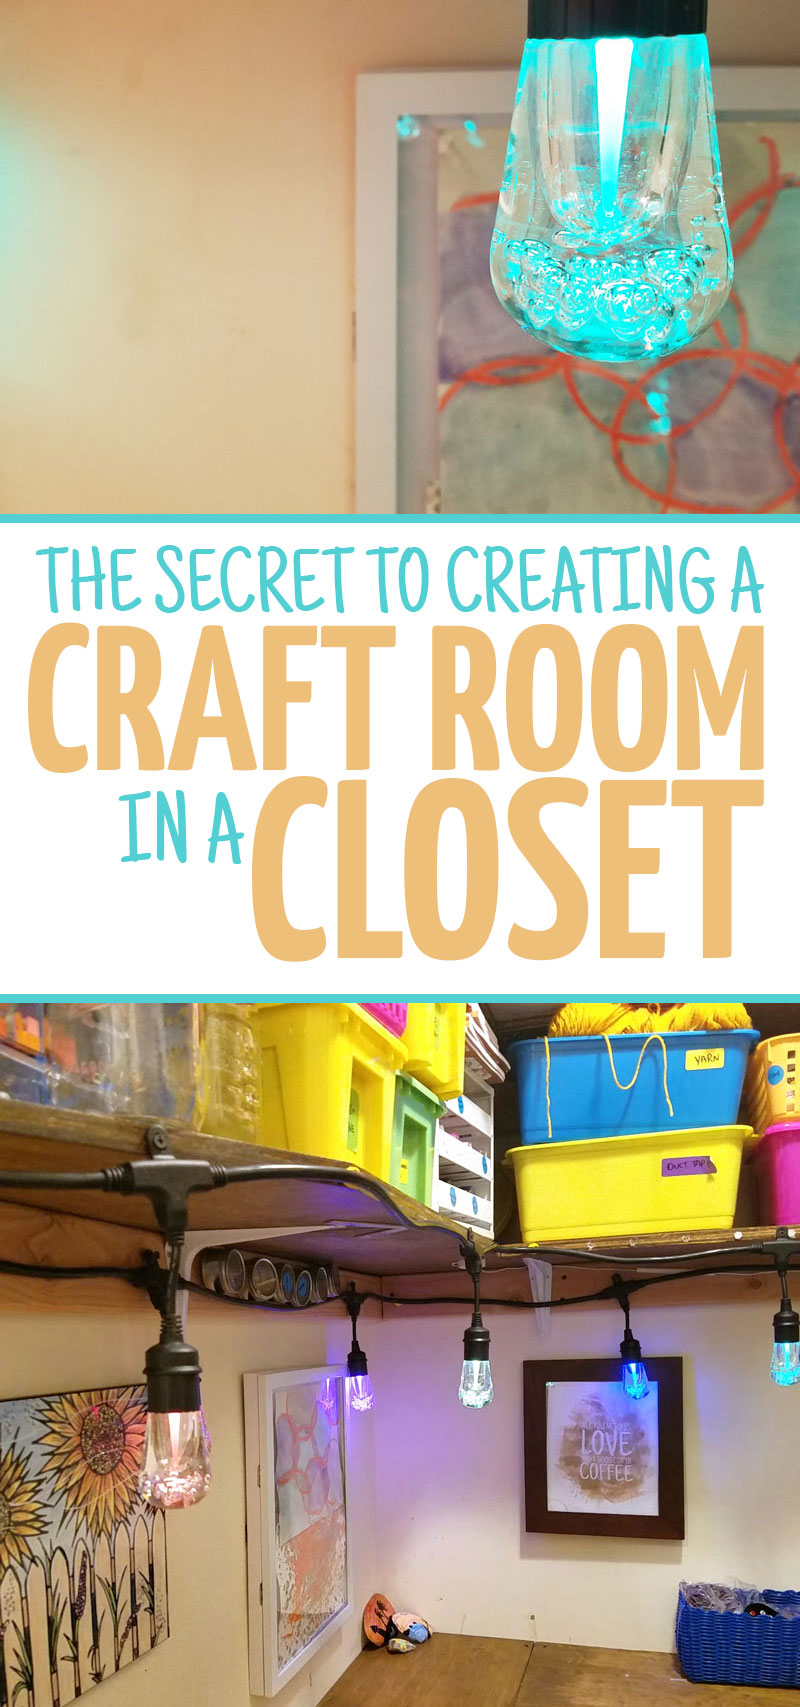 Check out the secret to making a craft room in a closet work - even though it's dark, claustrophobic, and, well, boring? This tip allows you to build a DIY craft room into a very small space such as a walk-in closet and still have it be functional - you'll love these craft room ideas especially for lighting!